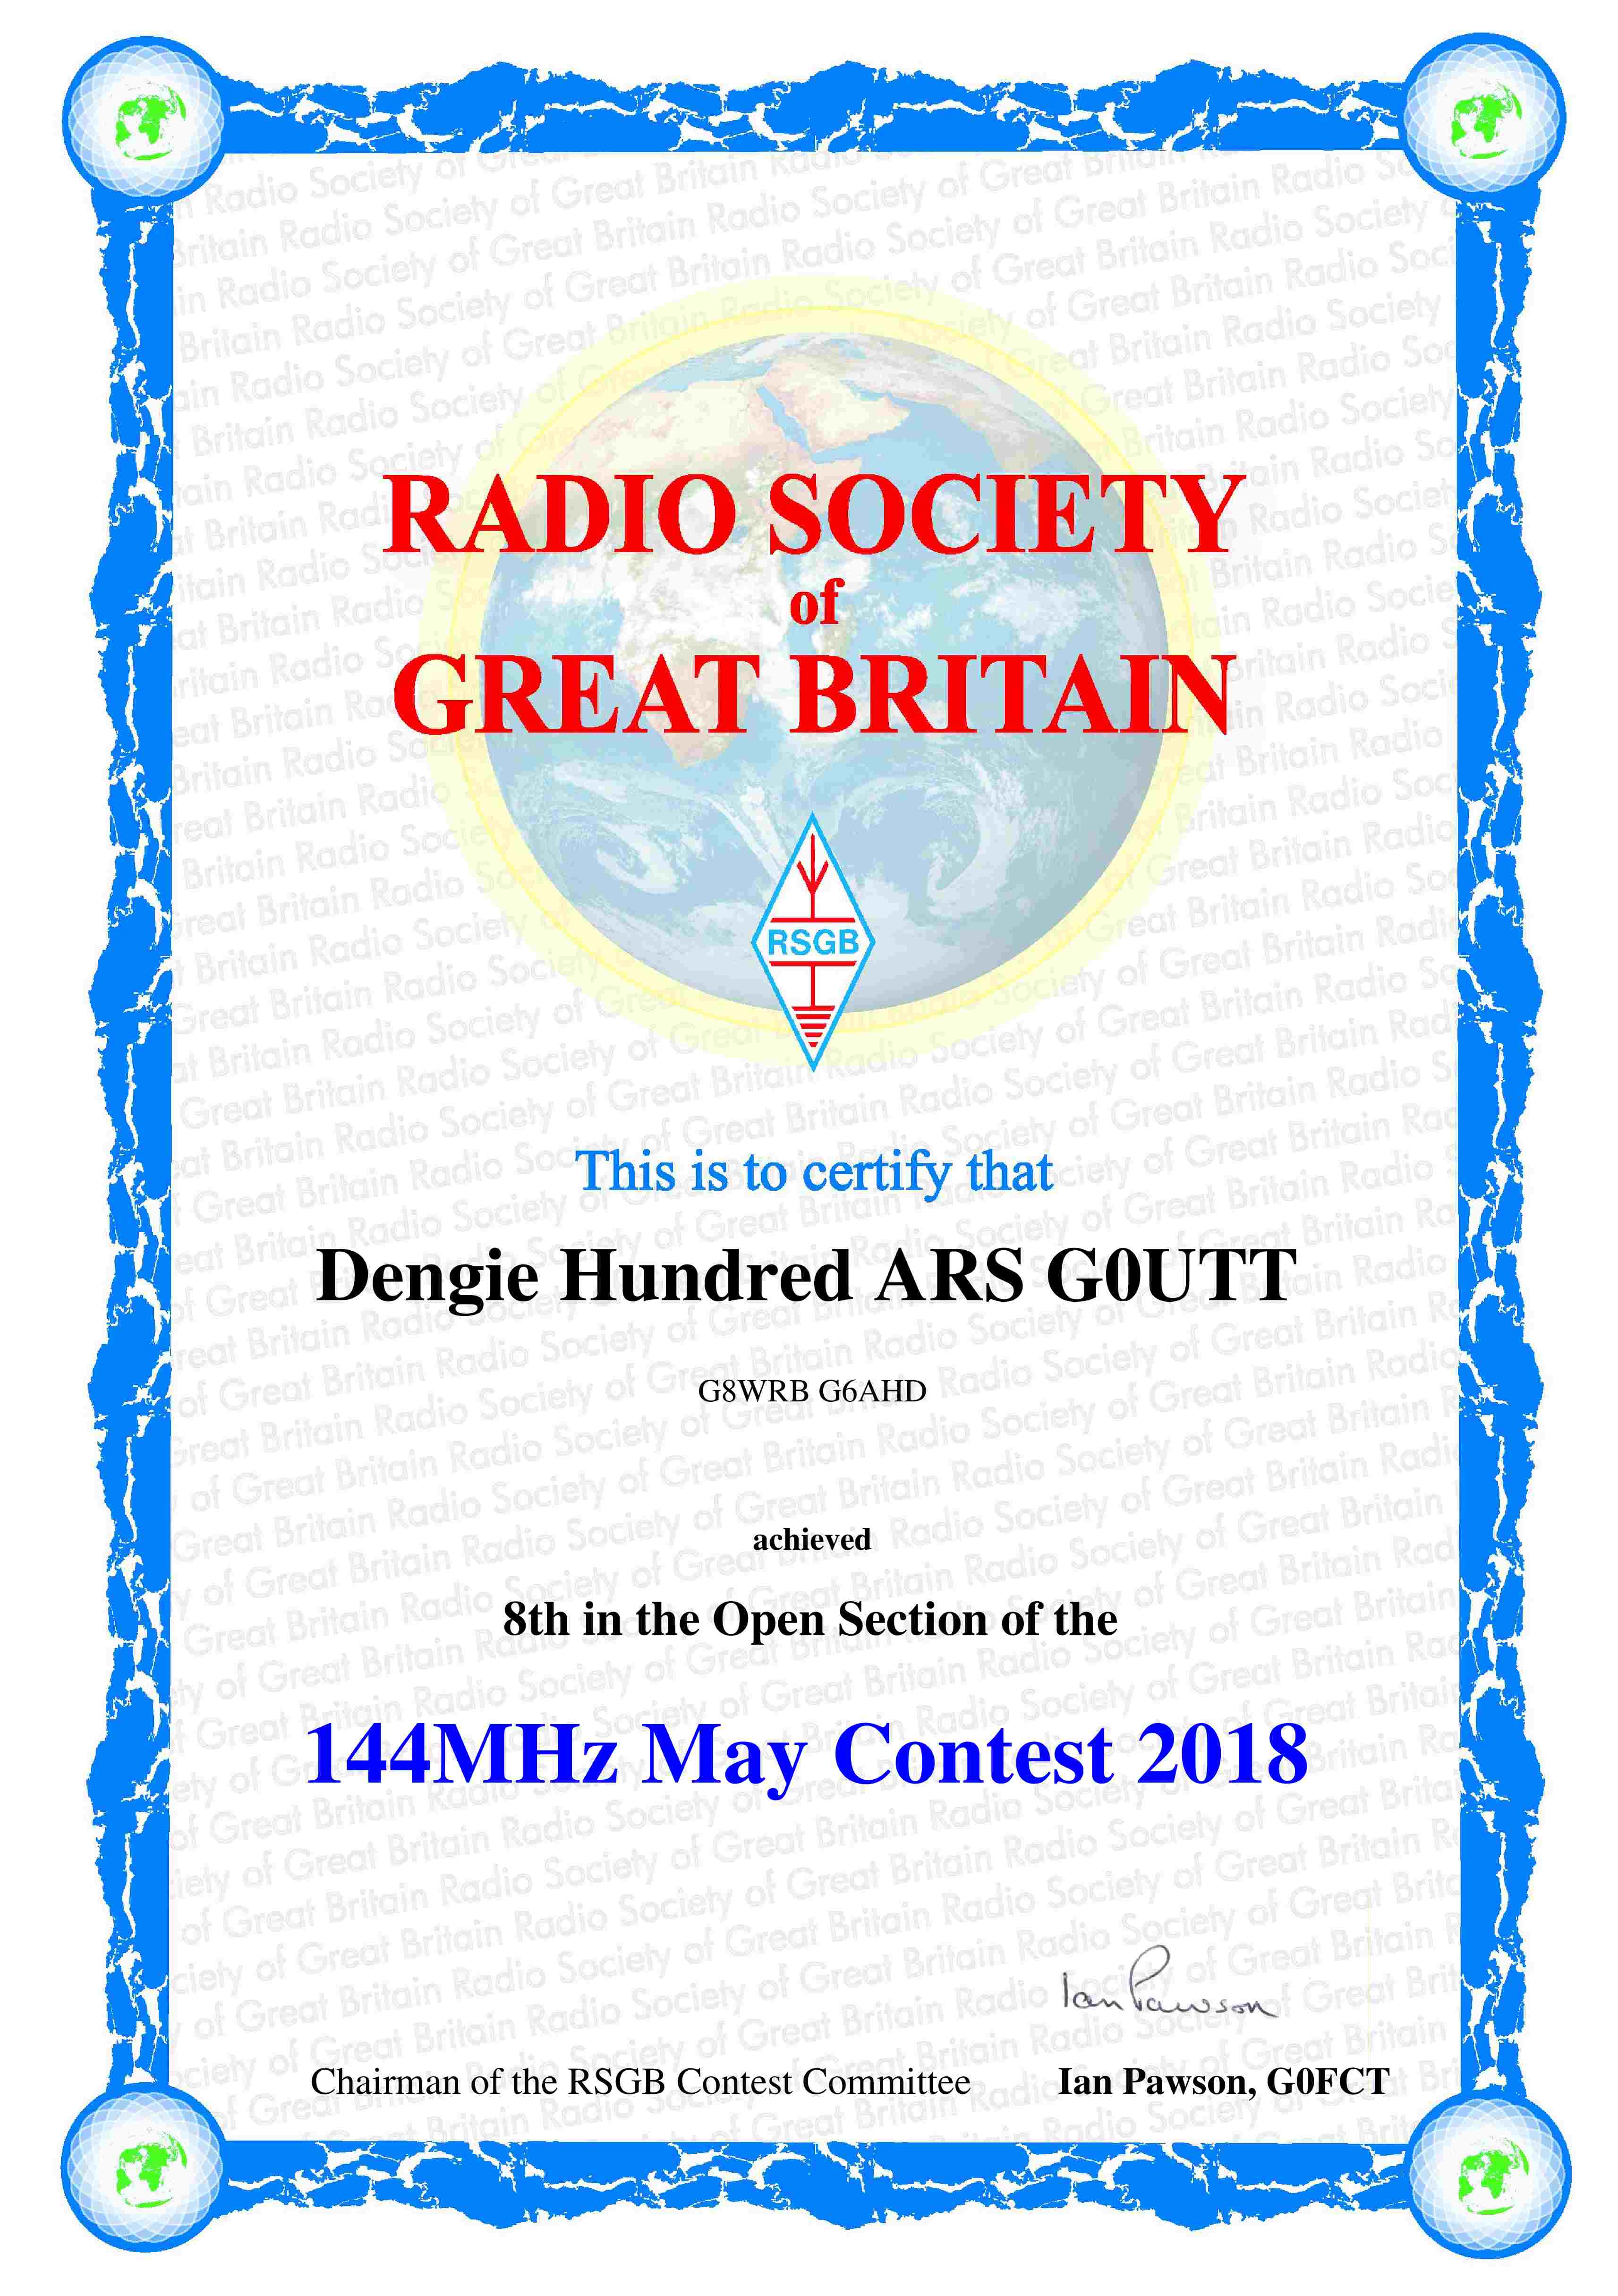 2m May 2018 VHF contest